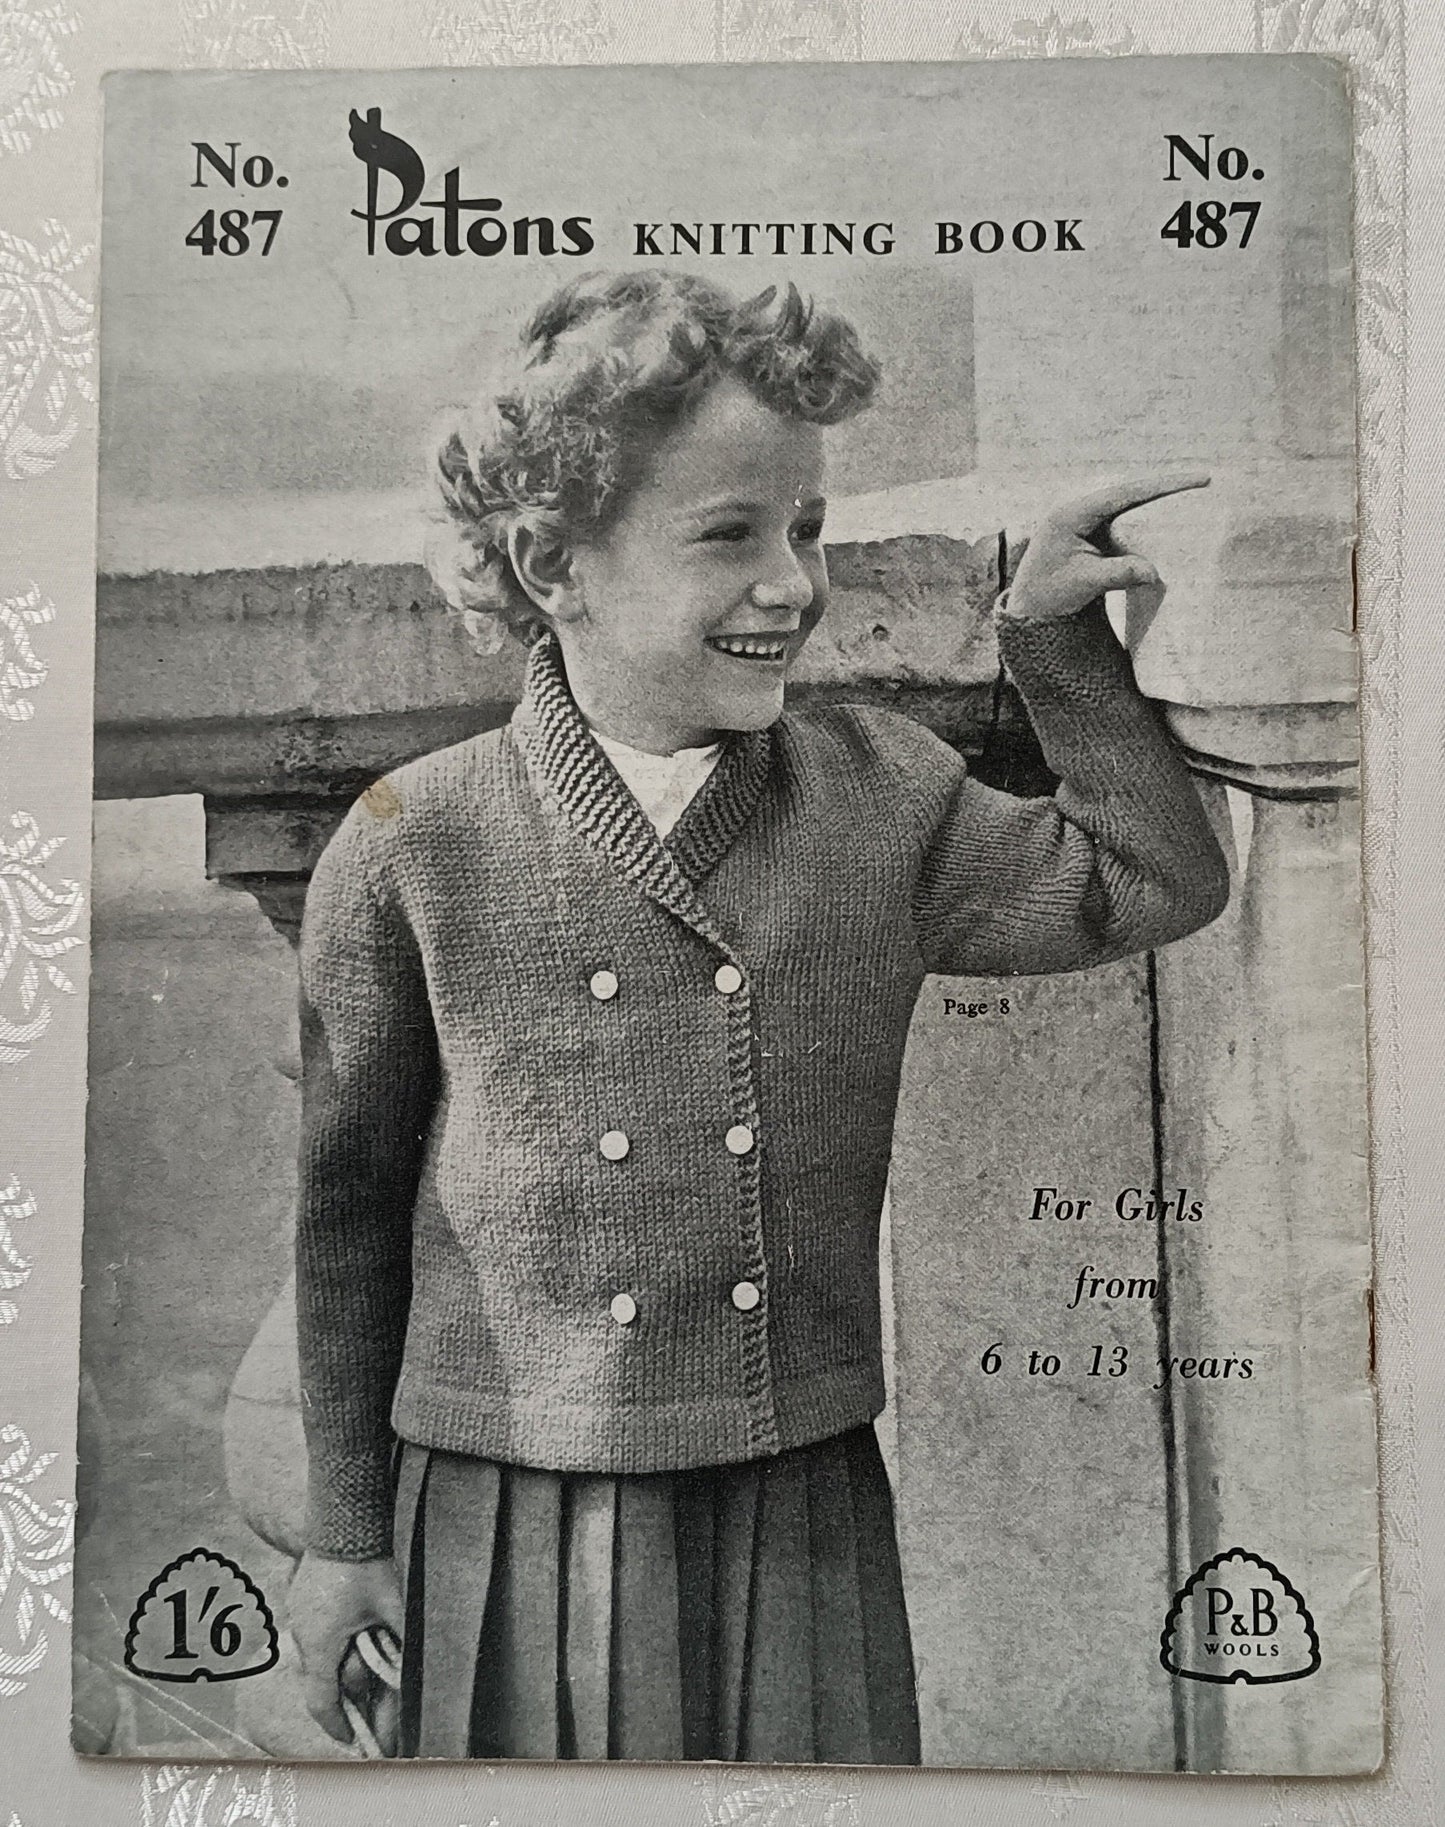 Patons knitting book 487 knitting patterns for girls from 6 - 13